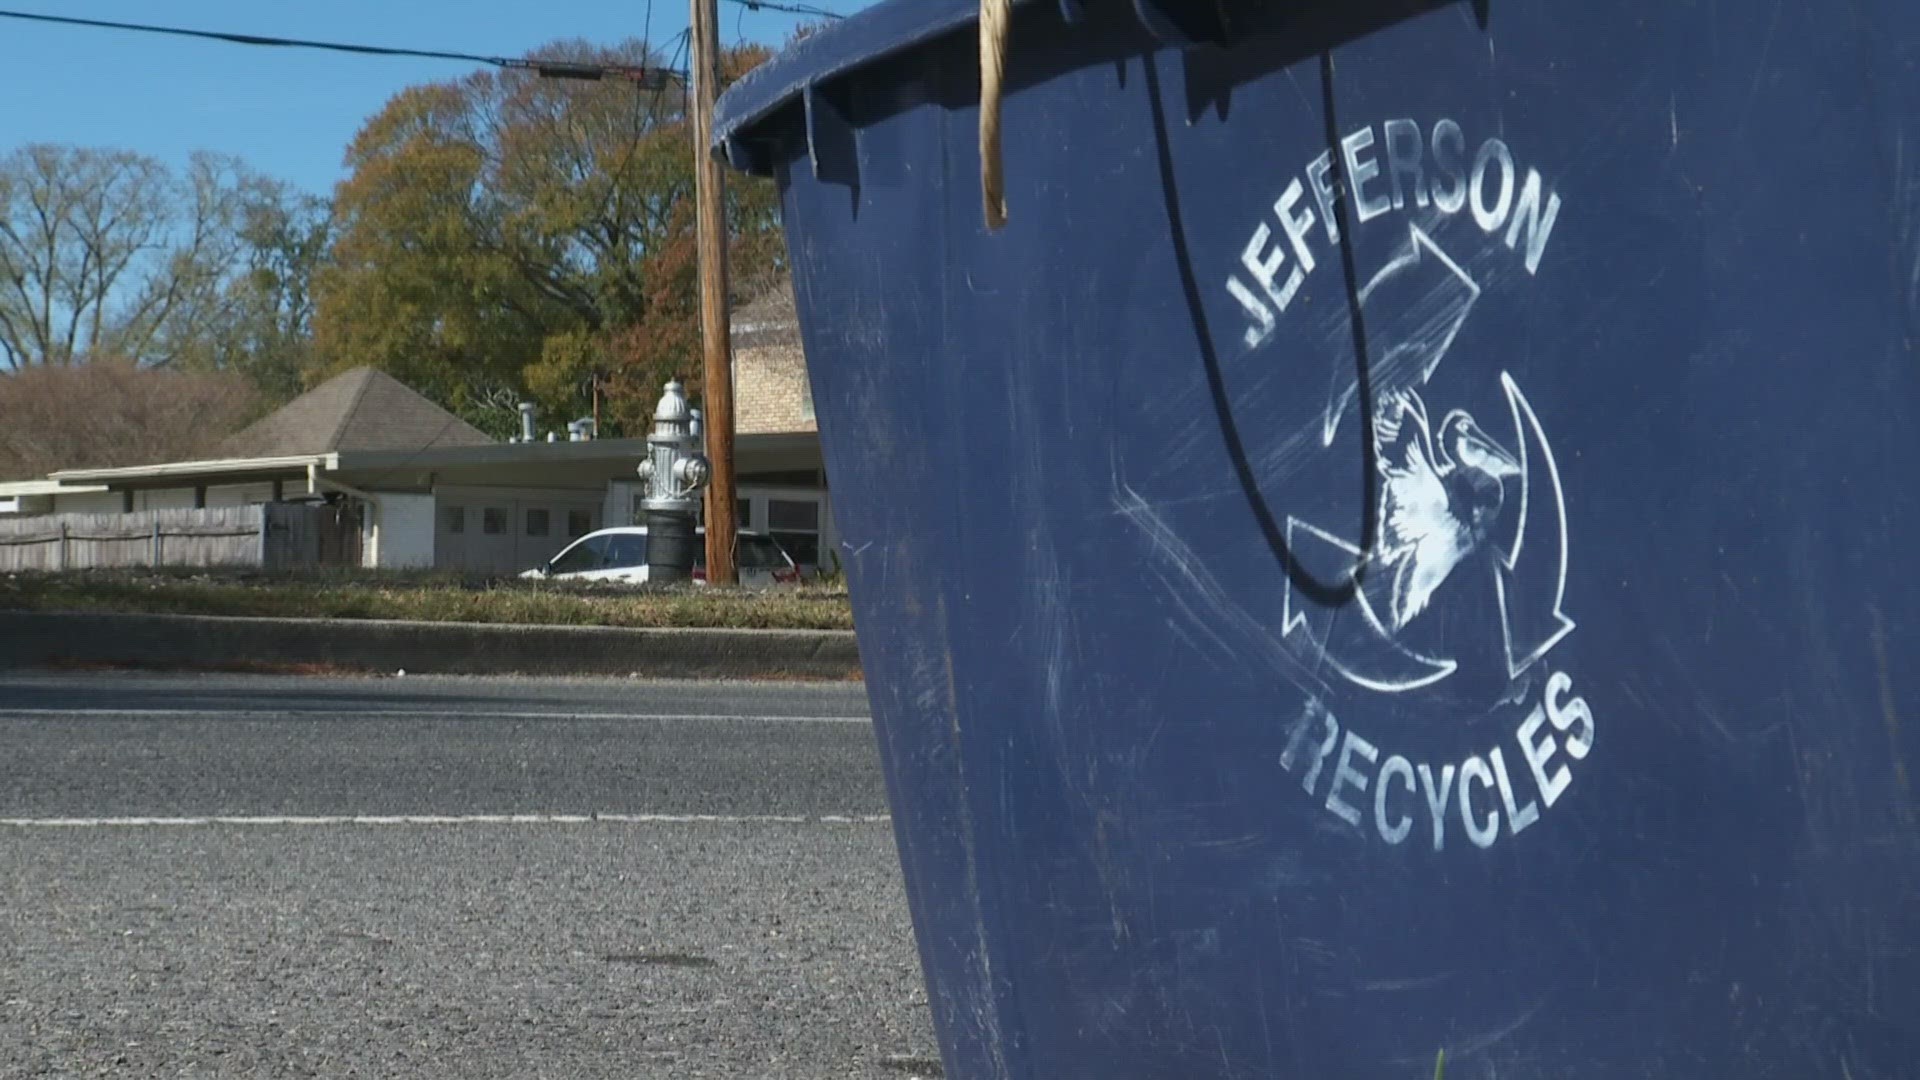 JP council votes to amend recycling contract.